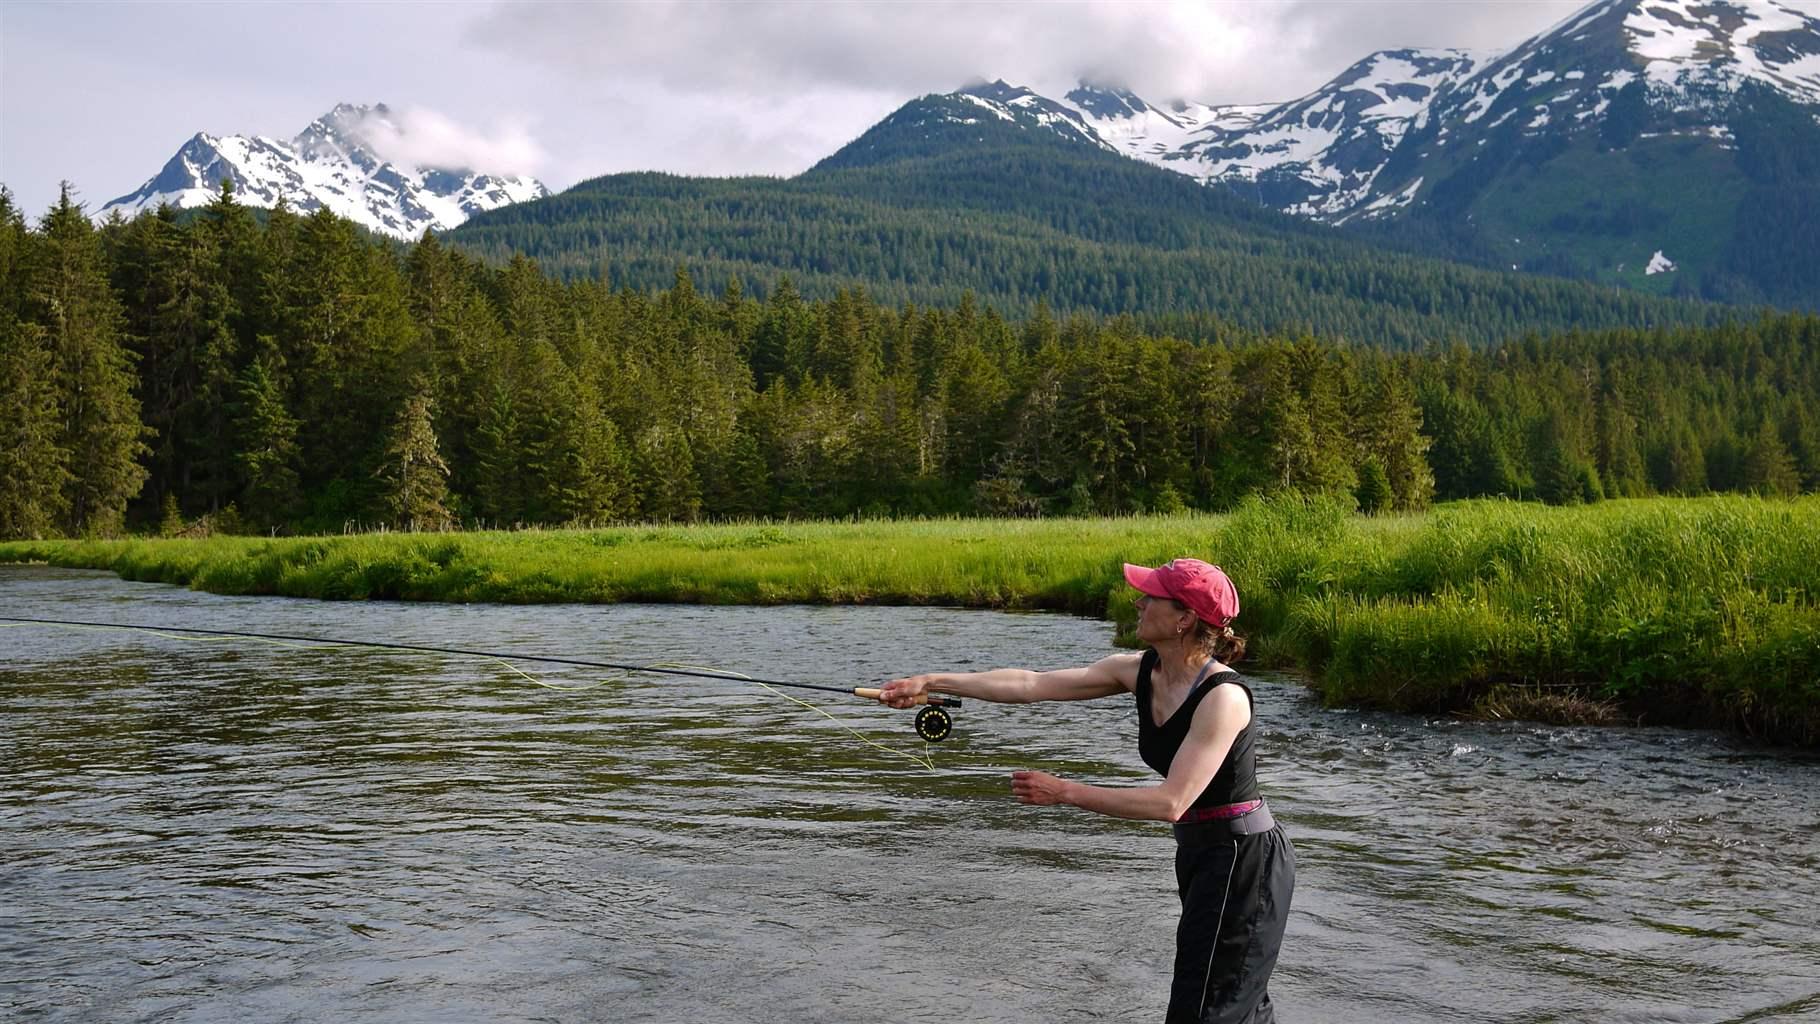 A woman fly-fishes on Admiralty Creek in the Tongass National Forest. Streams and rivers in the forest support large fish populations.